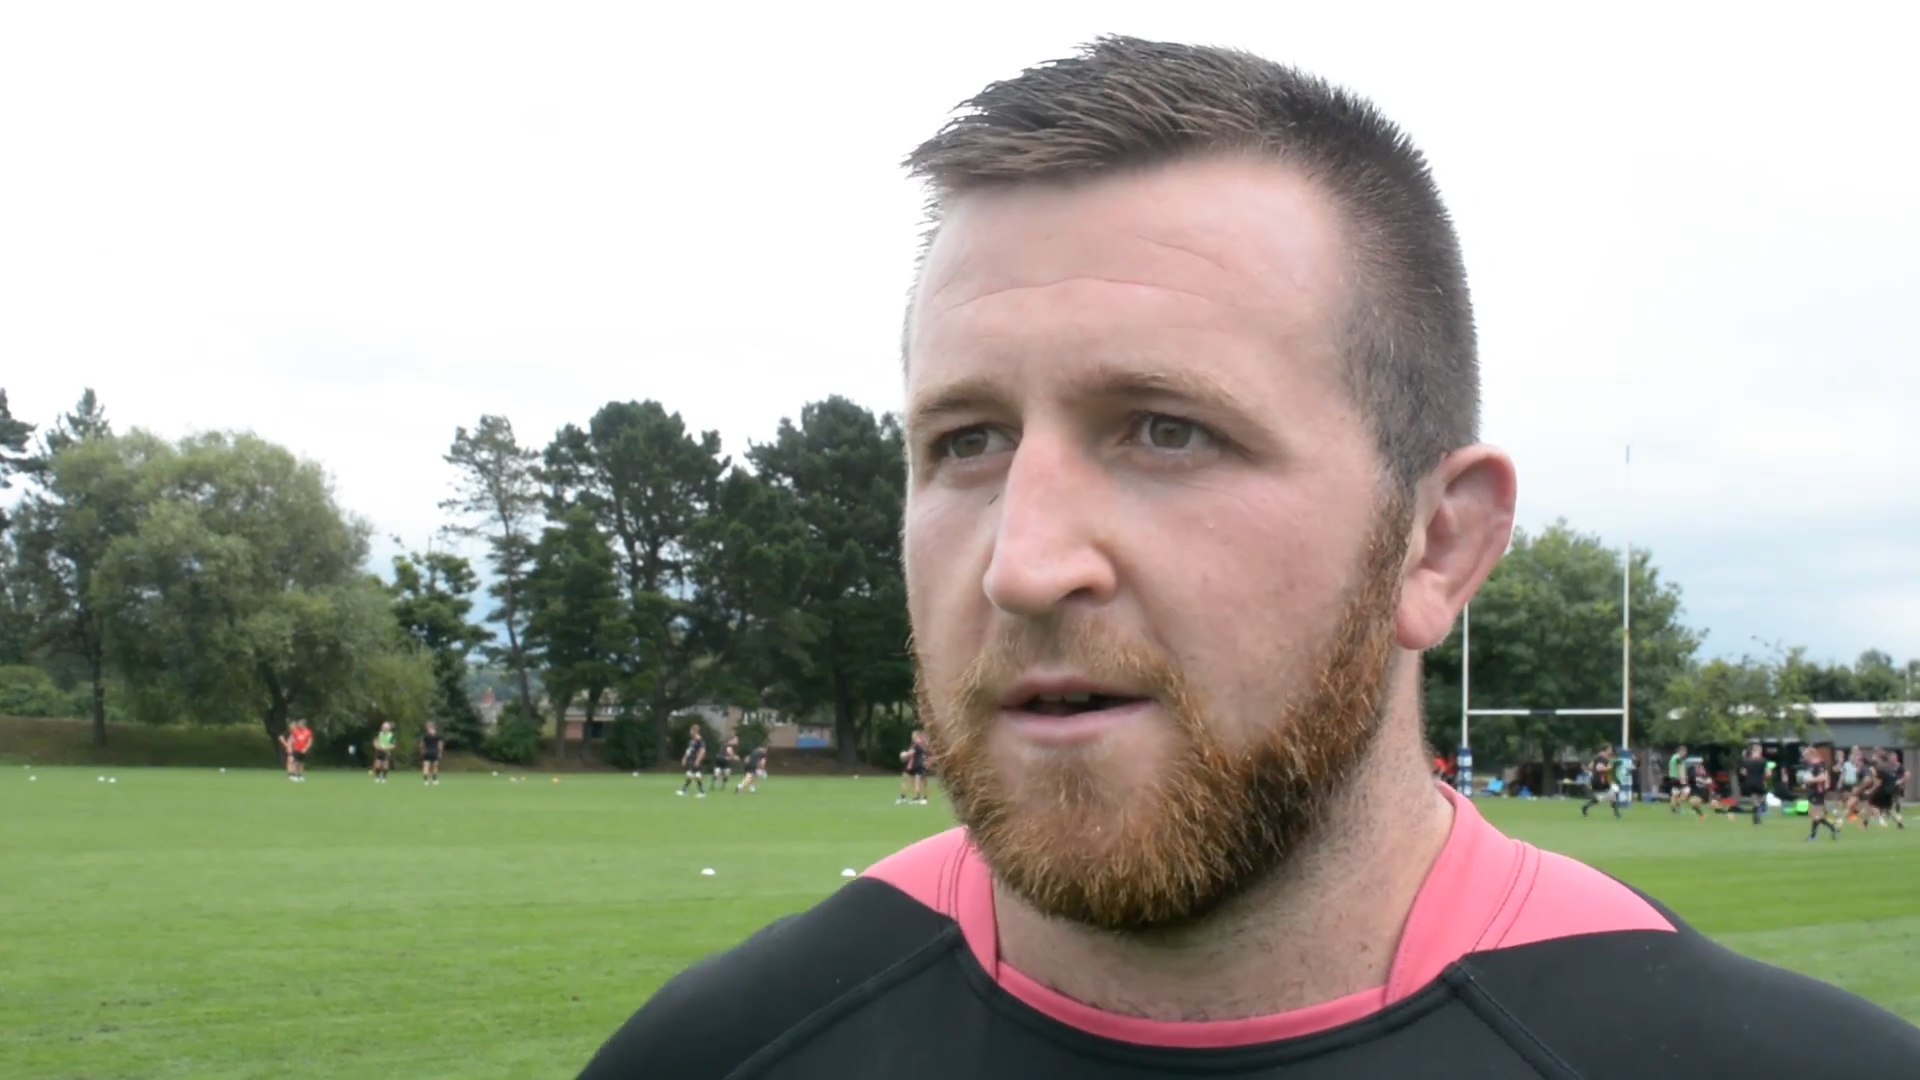 Alan O’Connor discusses pre-season training, his brother joining Ulster and expectations for the season.